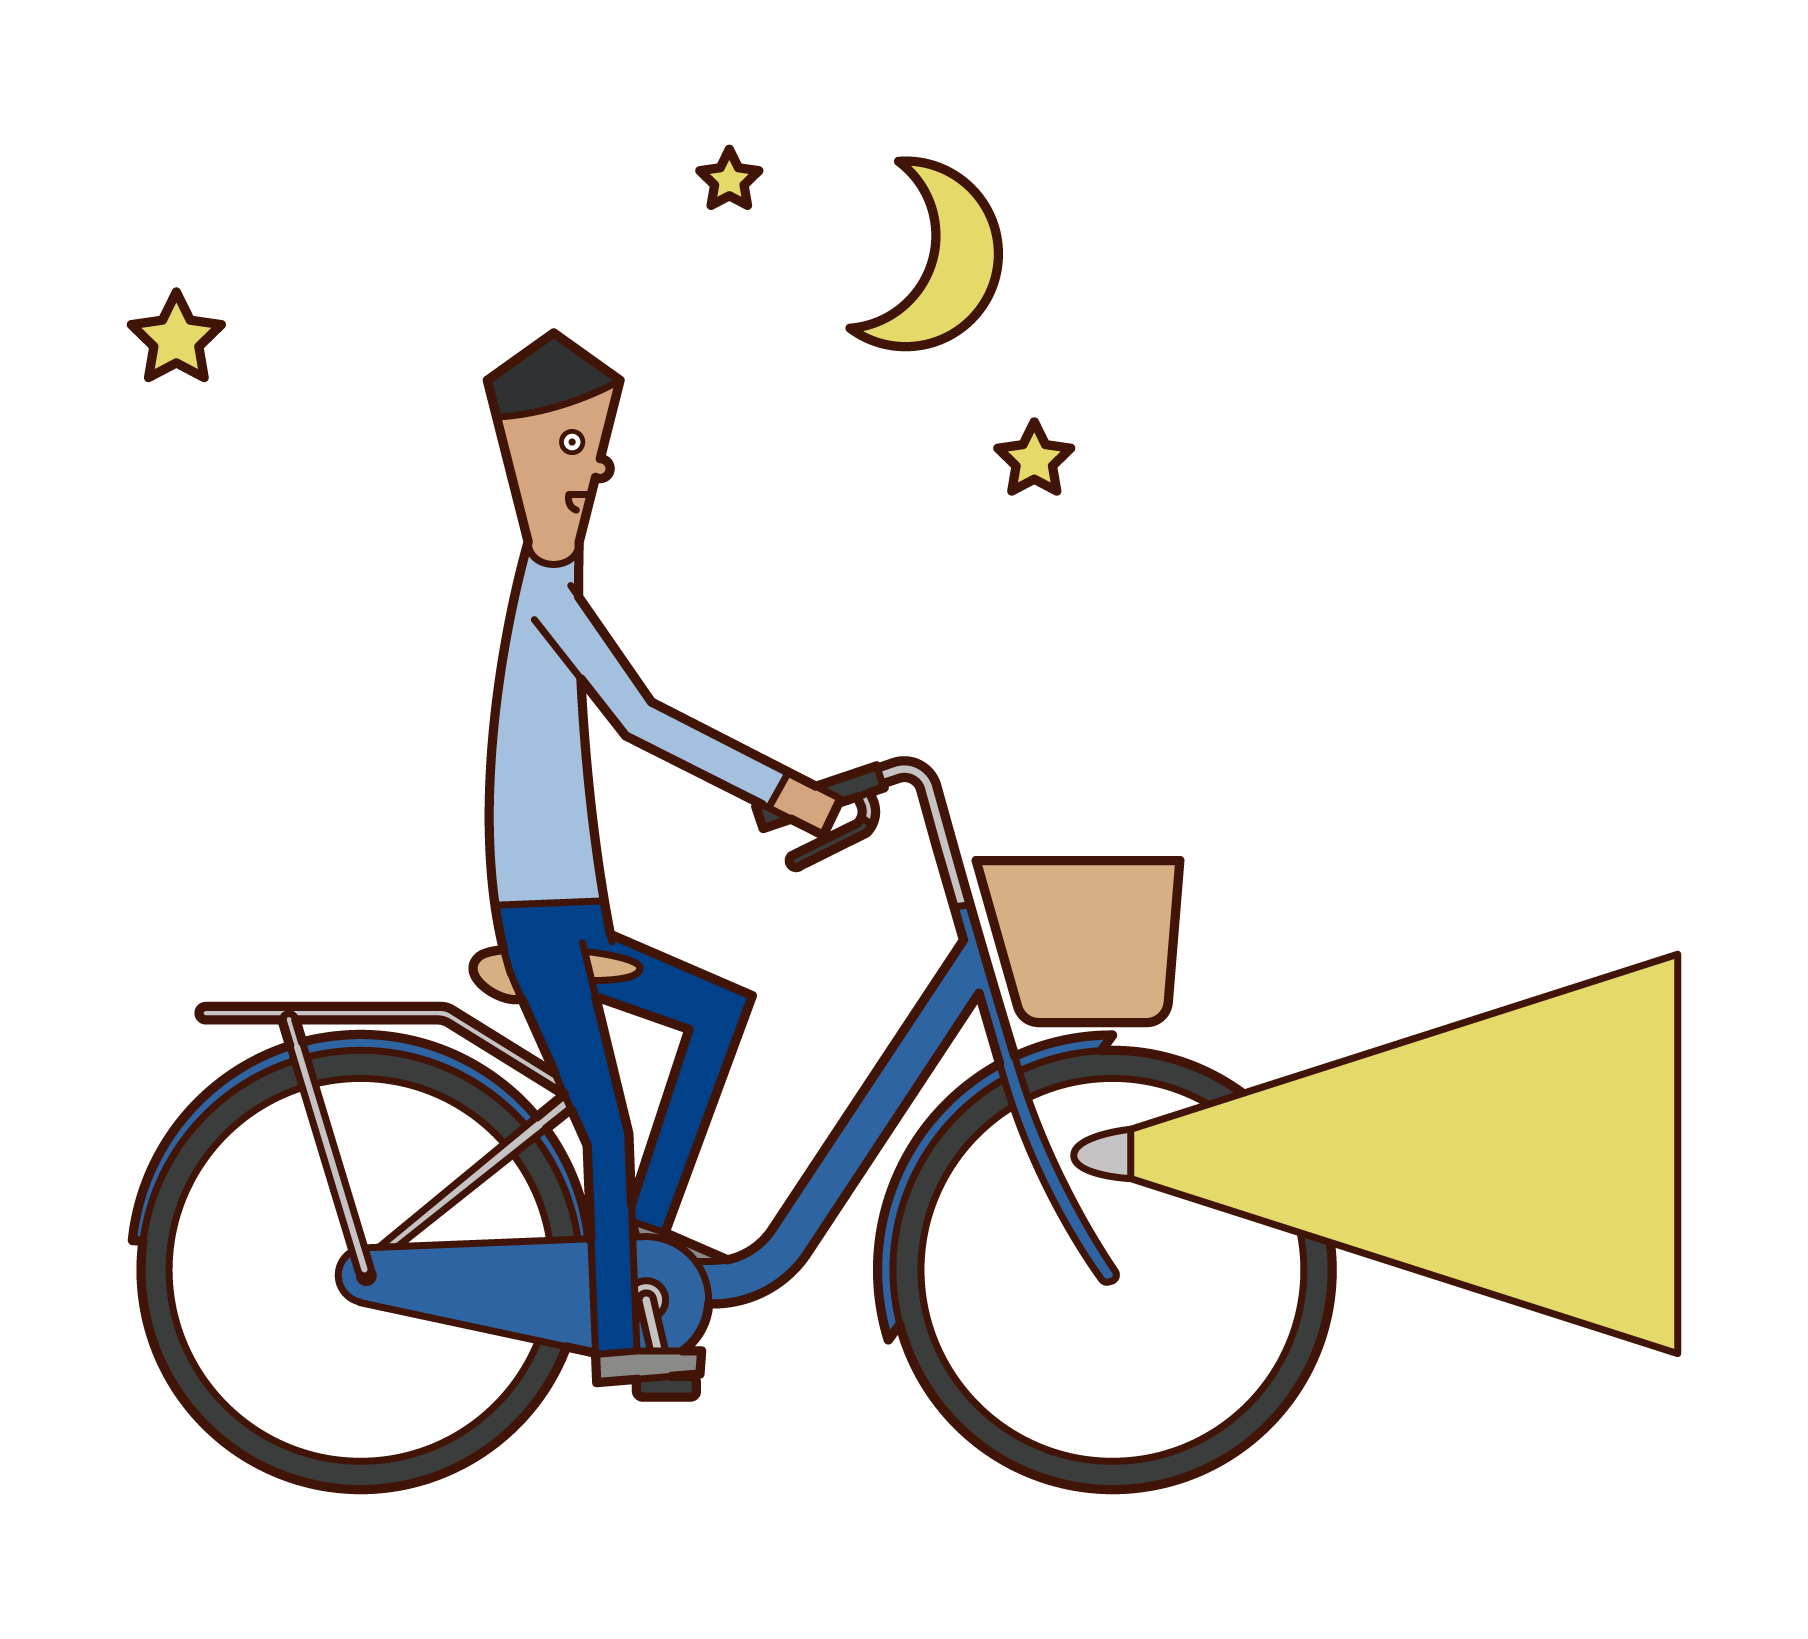 Illustration of a man riding a bicycle with a light on it